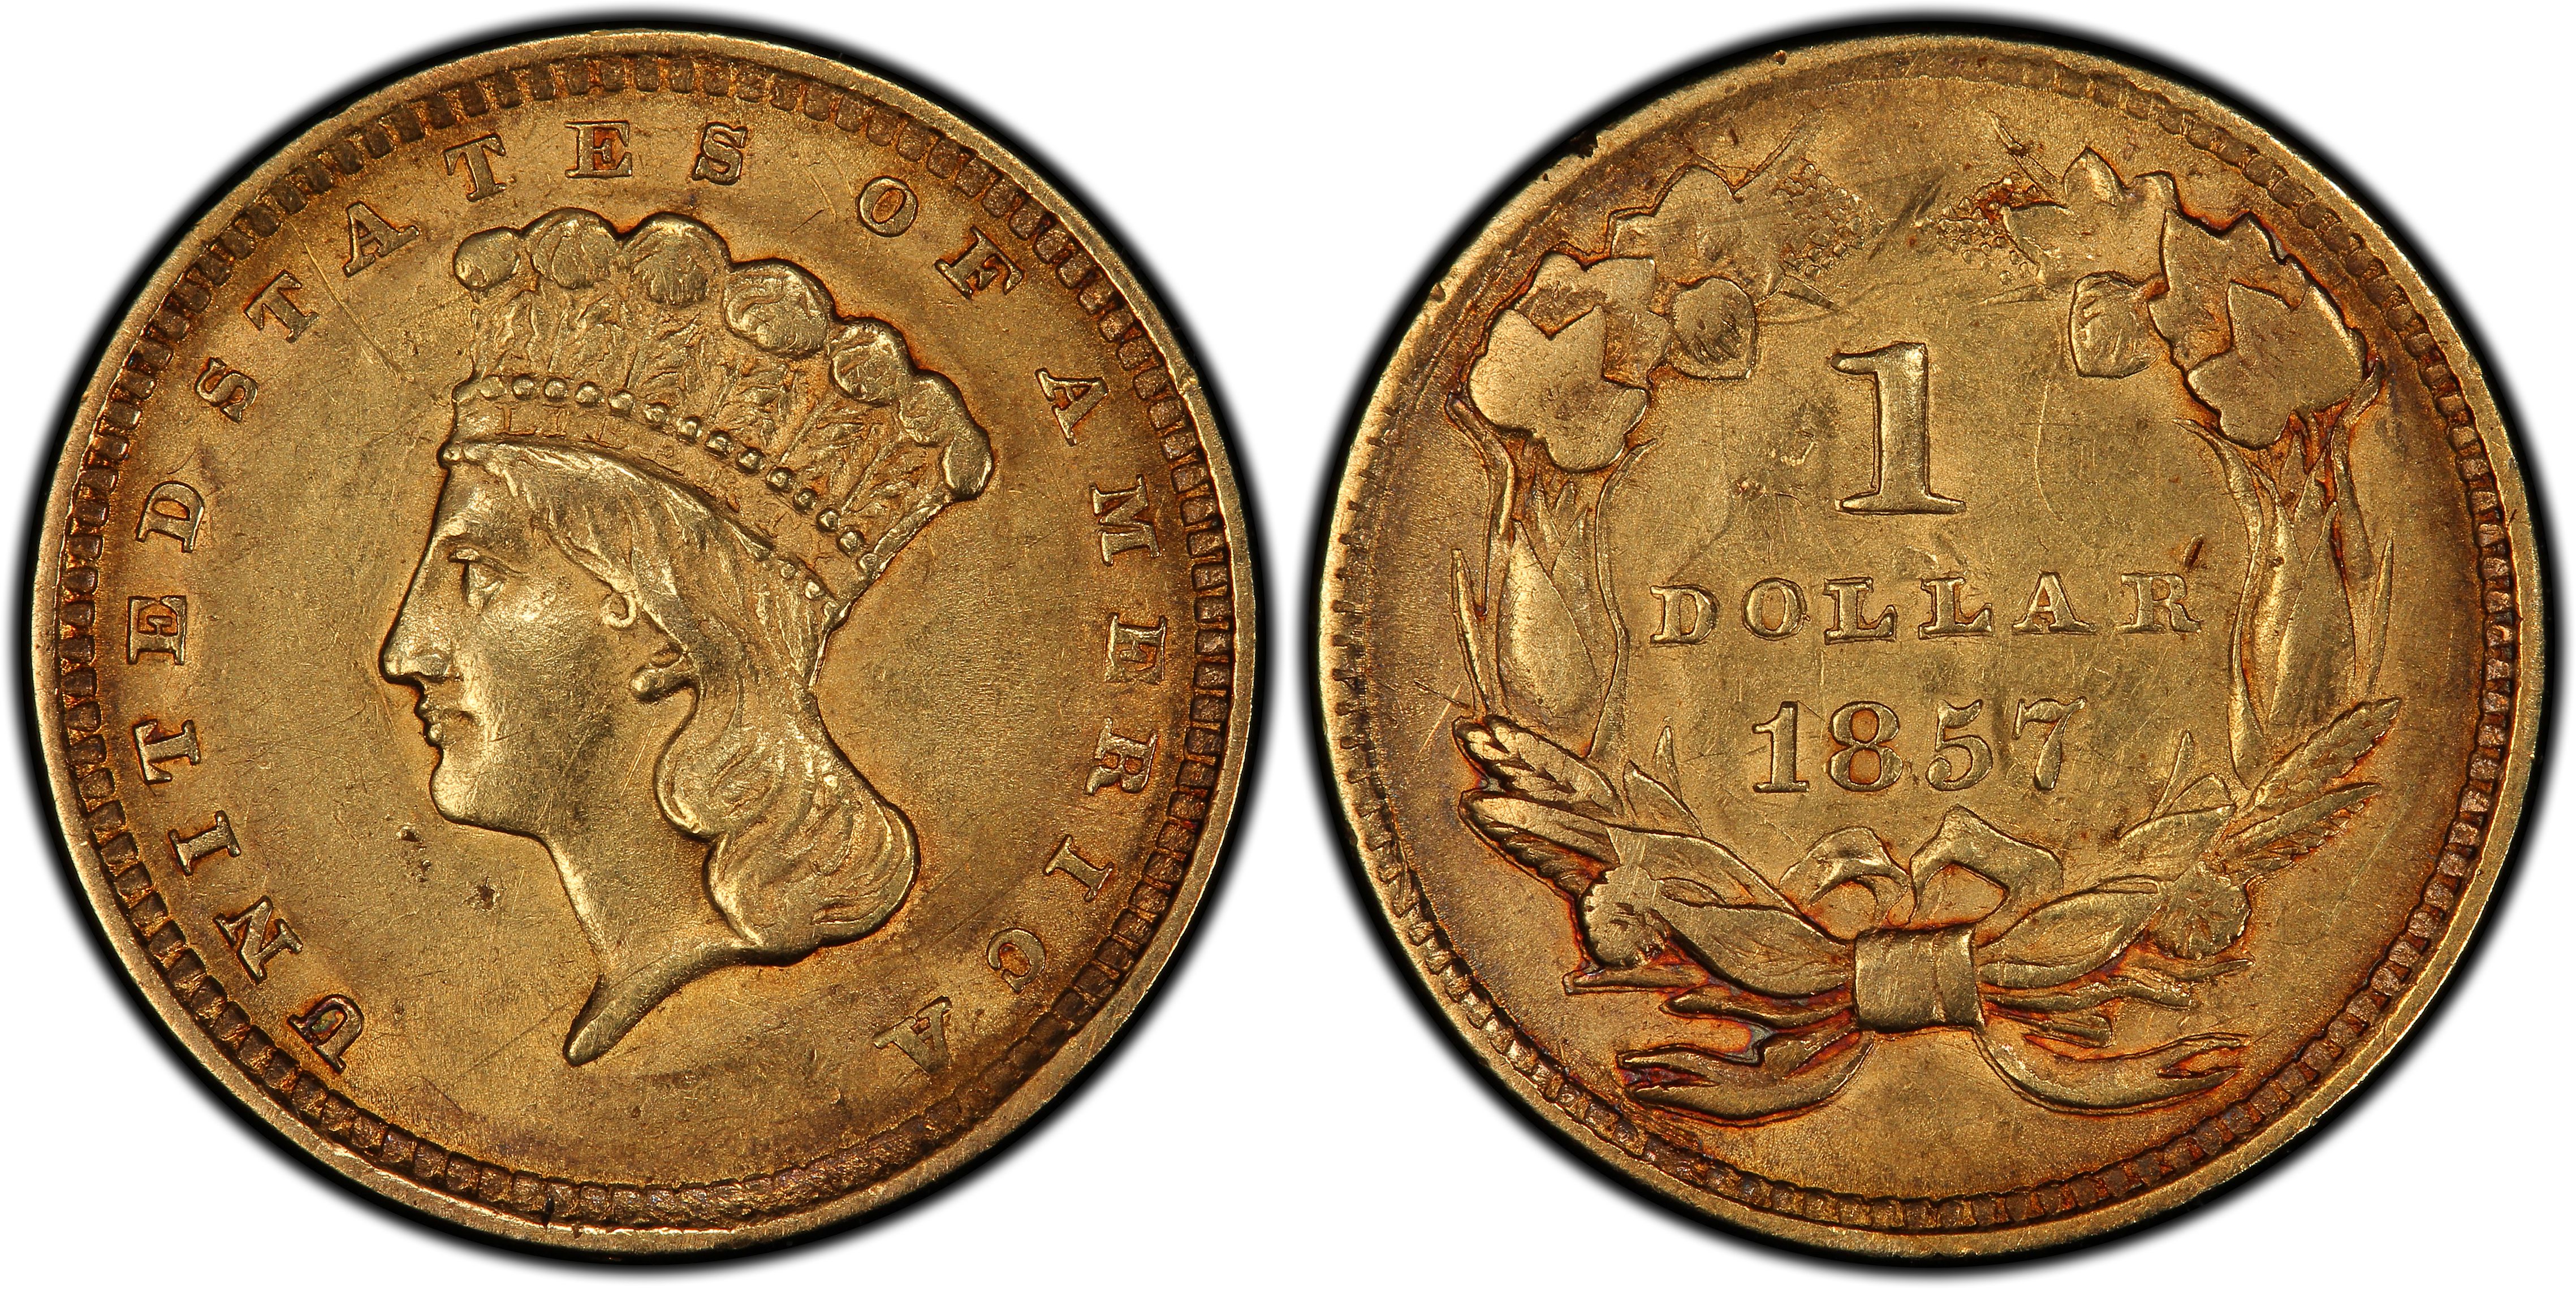 Images of Gold Dollar 1857 G$1 - PCGS CoinFacts